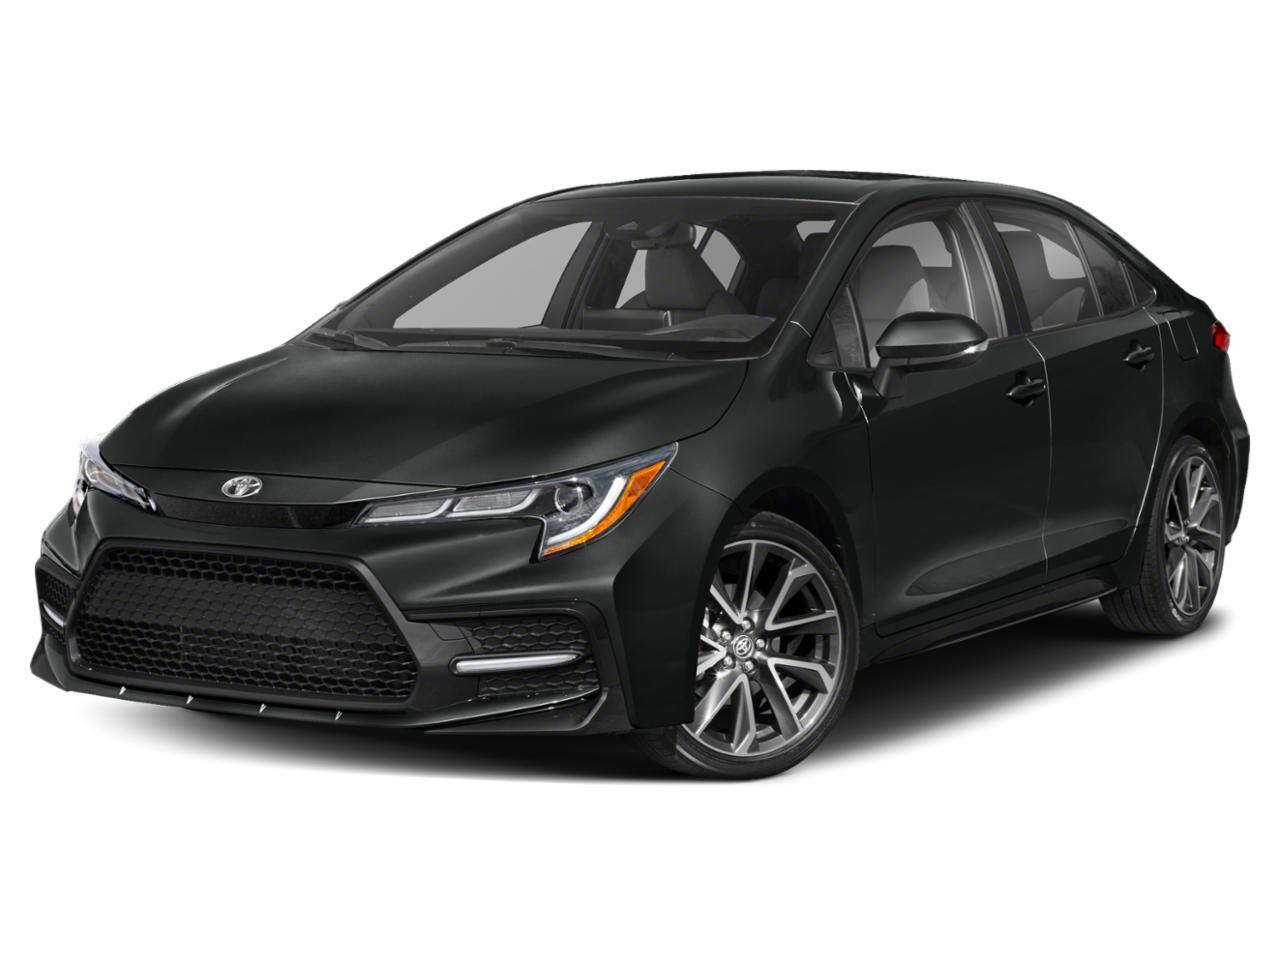 2022 Toyota Corolla SE CVT- 1 OWNER| NO ACCIDENTS| BLUETOOTH| 